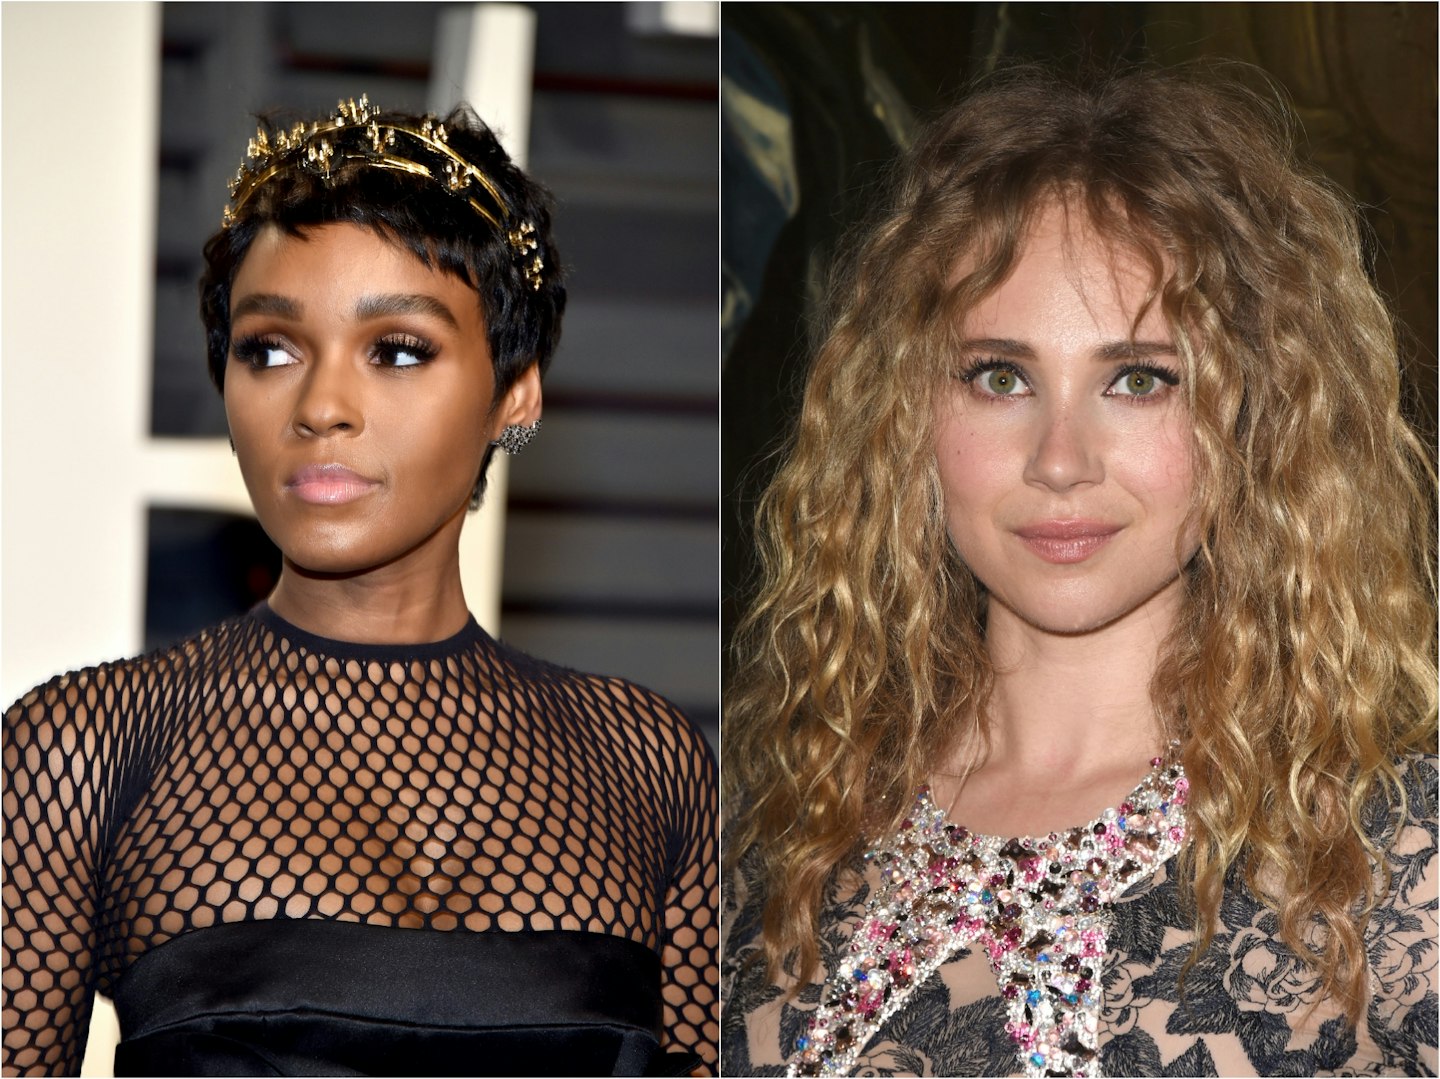 Janelle Monae and Juno Temple